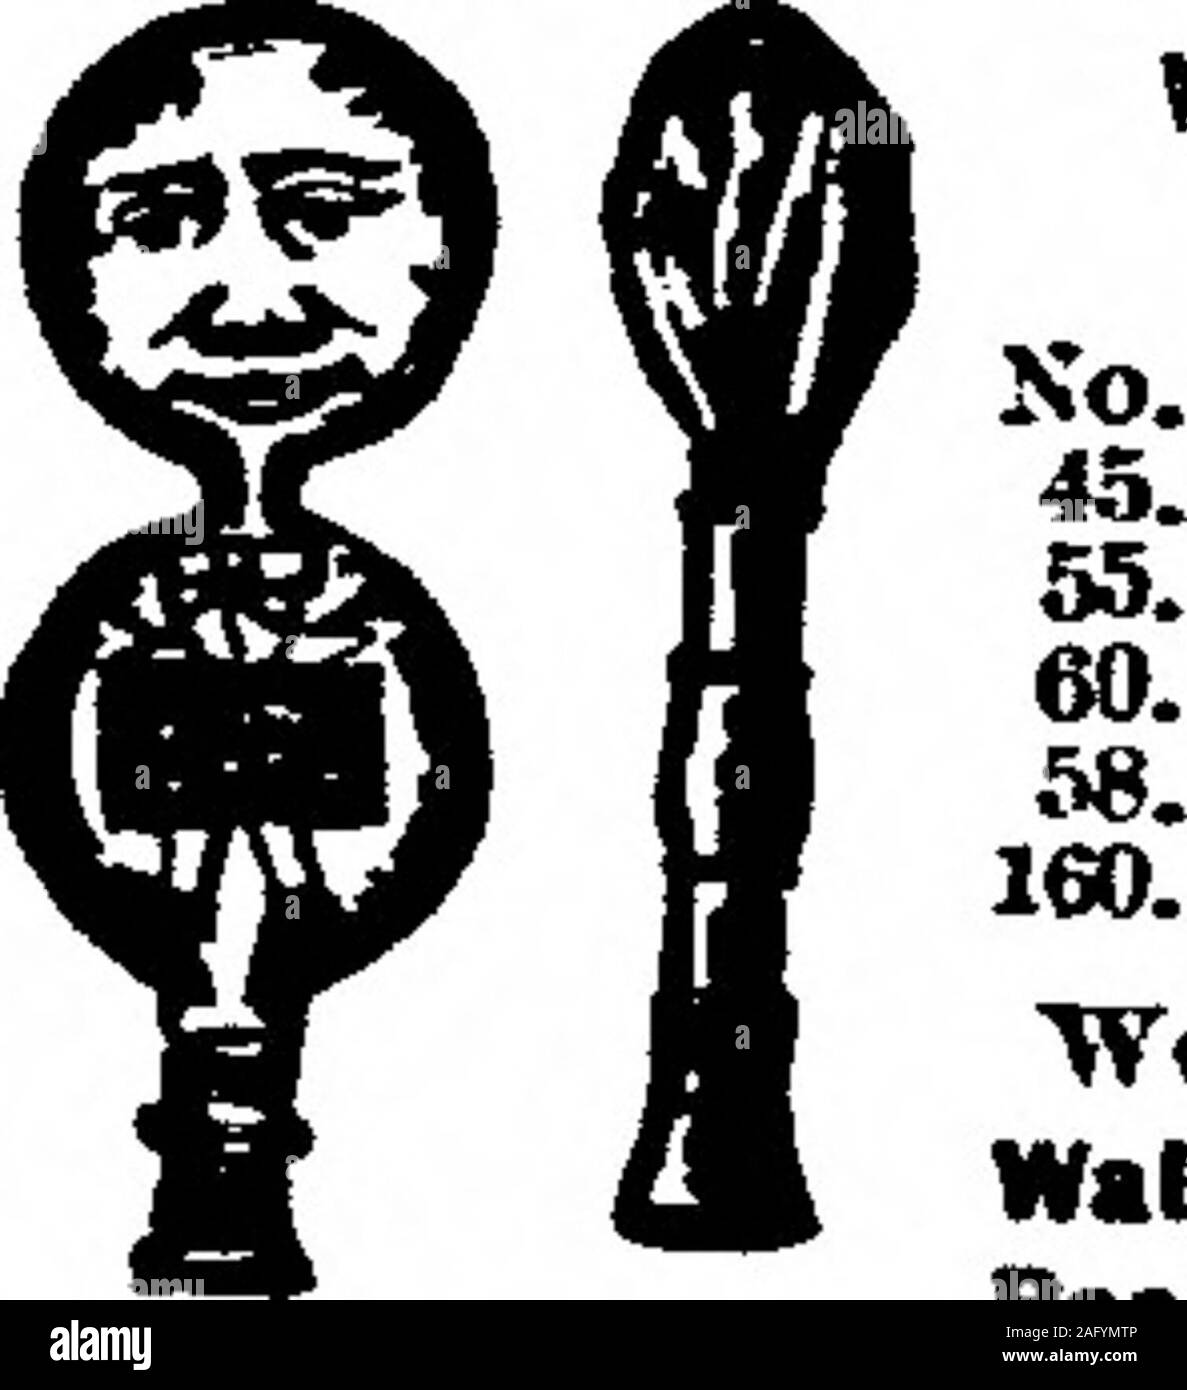 . Billboard (Jan-Jun 1899). ^^ 1. White Rattan Switches 40 &gt;^&gt;V OH. Fancy covered whips. 1 50 WHISTLING BALLOONS. Gross in Box. Per Gross Assorted colors $ 2 00 Assorted colors... 2 25Assorted colors... 2 75 McGiniy 3 25 Serpents 3 25 We also cany full lines otWalking Canes, Cheap Jewelry.Pocket Knives, Pickeat Prizes,etc. and make np selected lots for $5, $10, $20 andup. Catalogue mailed on application. COB, YQPffCaS Sa CO., 6th and St Charles St., ST. LOUIS, MO. CENTRAL CANADA —=EXHIBITIONERS. OTTAWA, 0NT., CANADA, September 11th to 23rd, 1899. TWO FULL WEEK8. Correspondence, also exhi Stock Photo